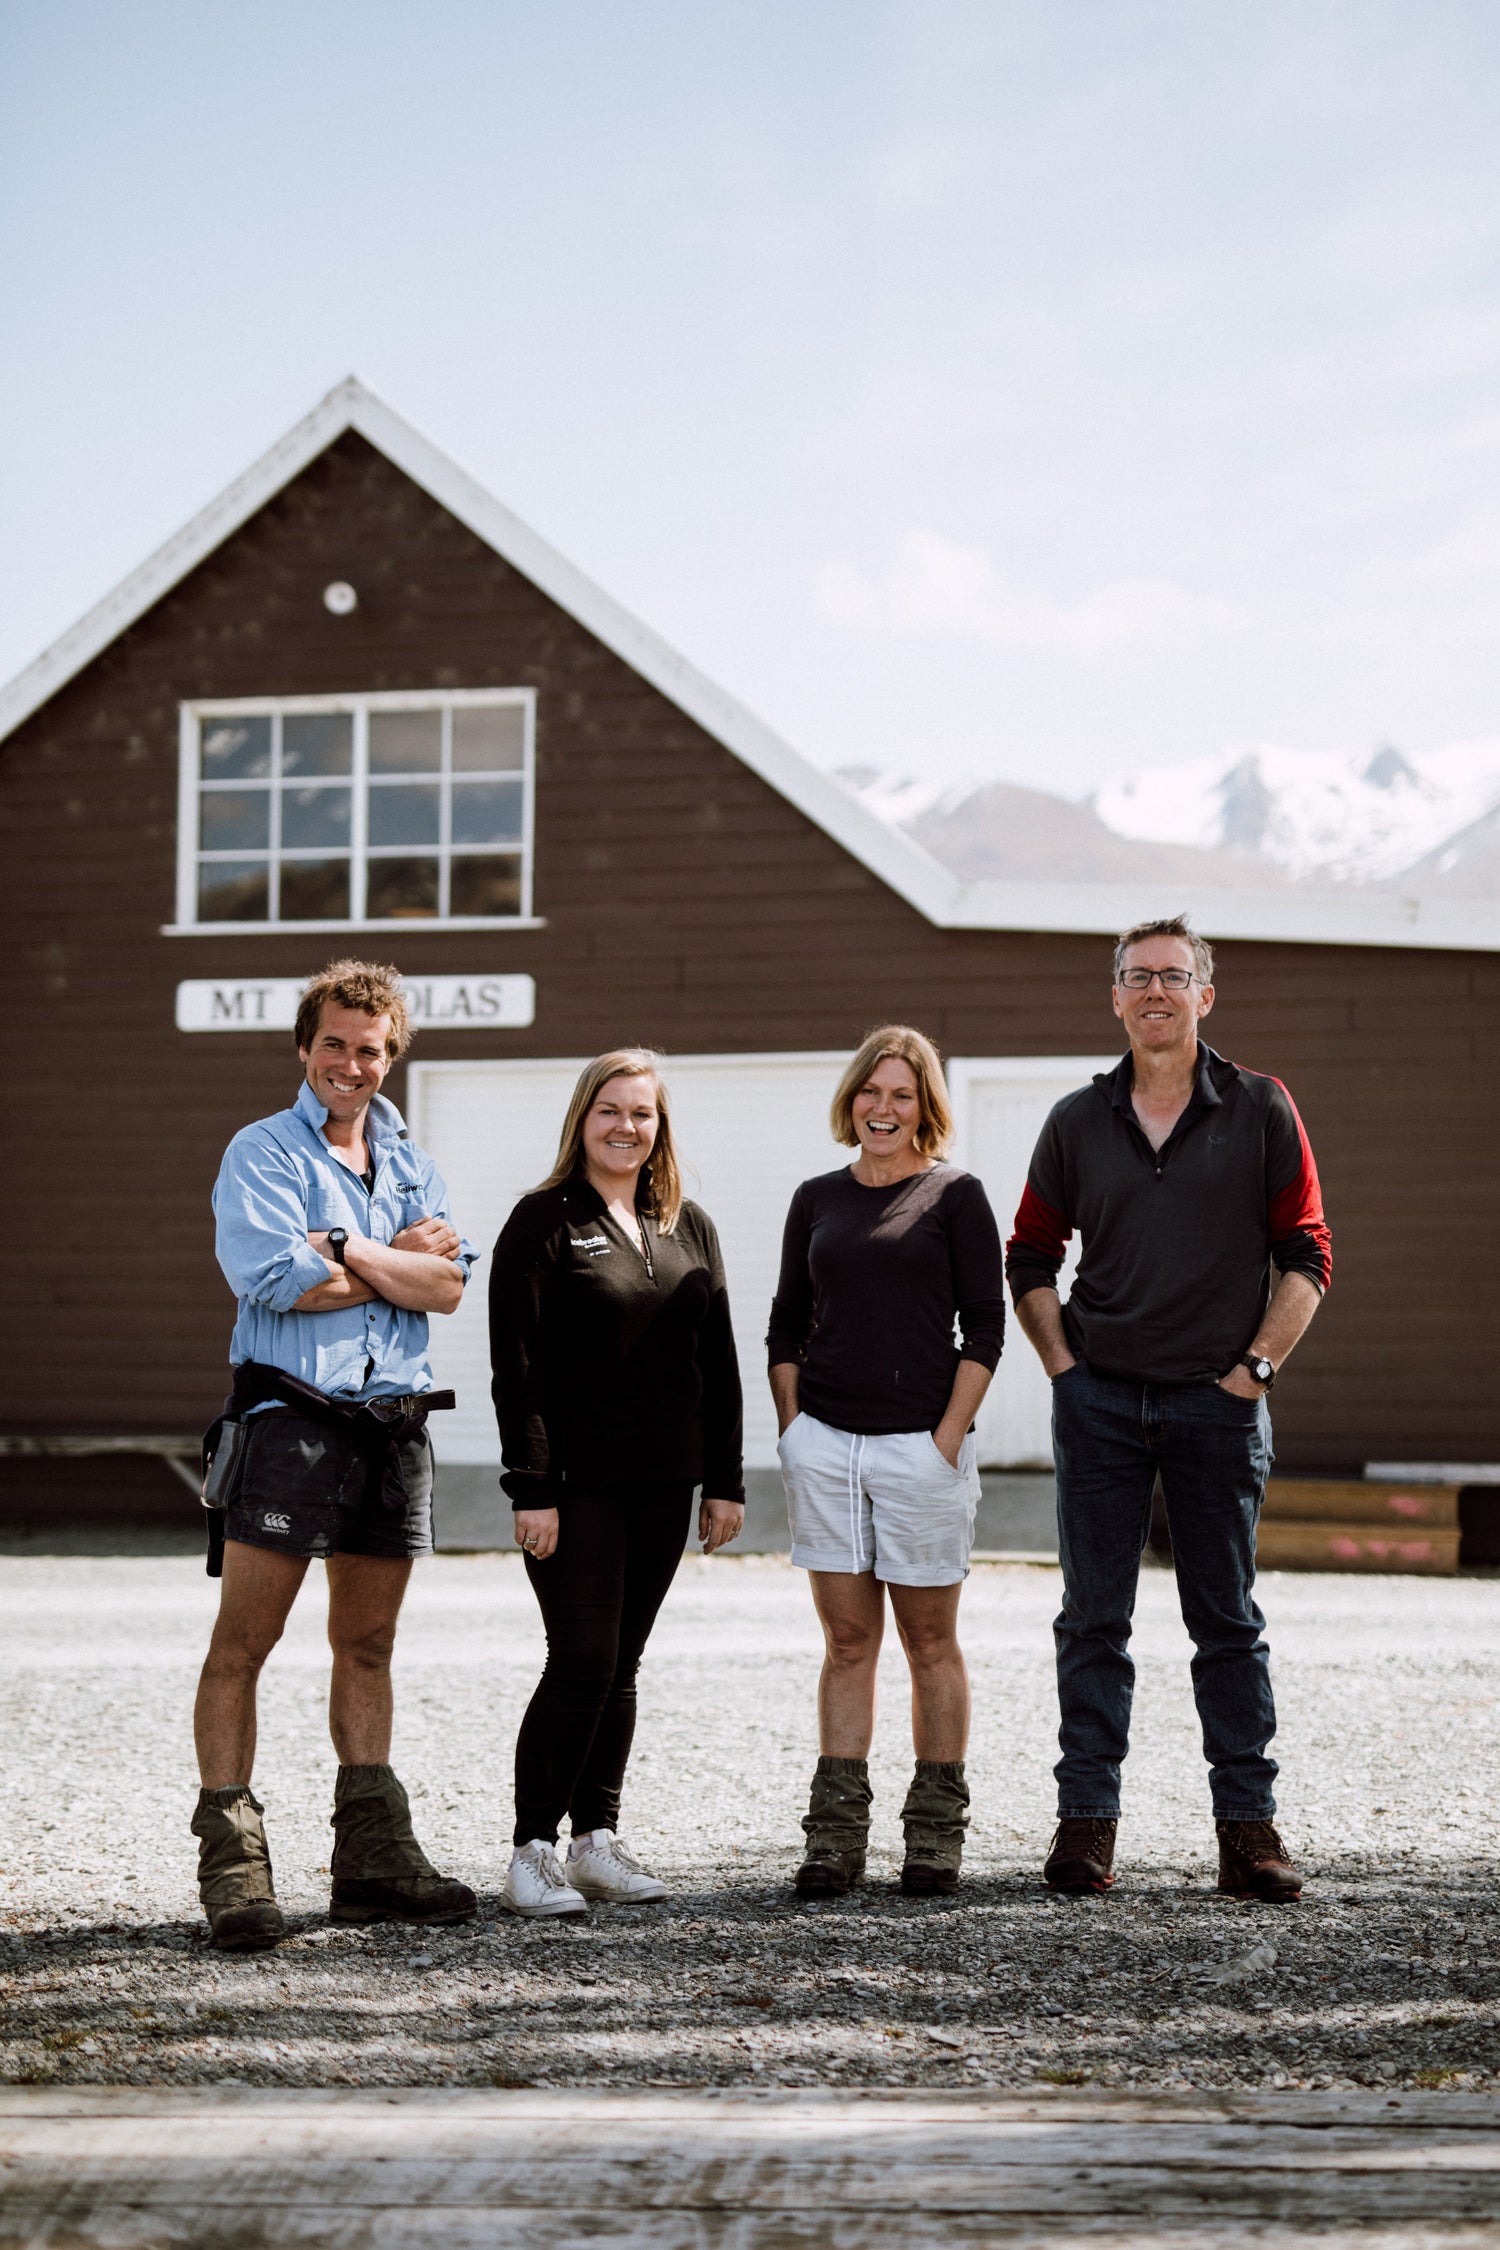 Mount Nicholas Merino founders Kate, Jack, Phil and Latisha standing infront of farm buildings.